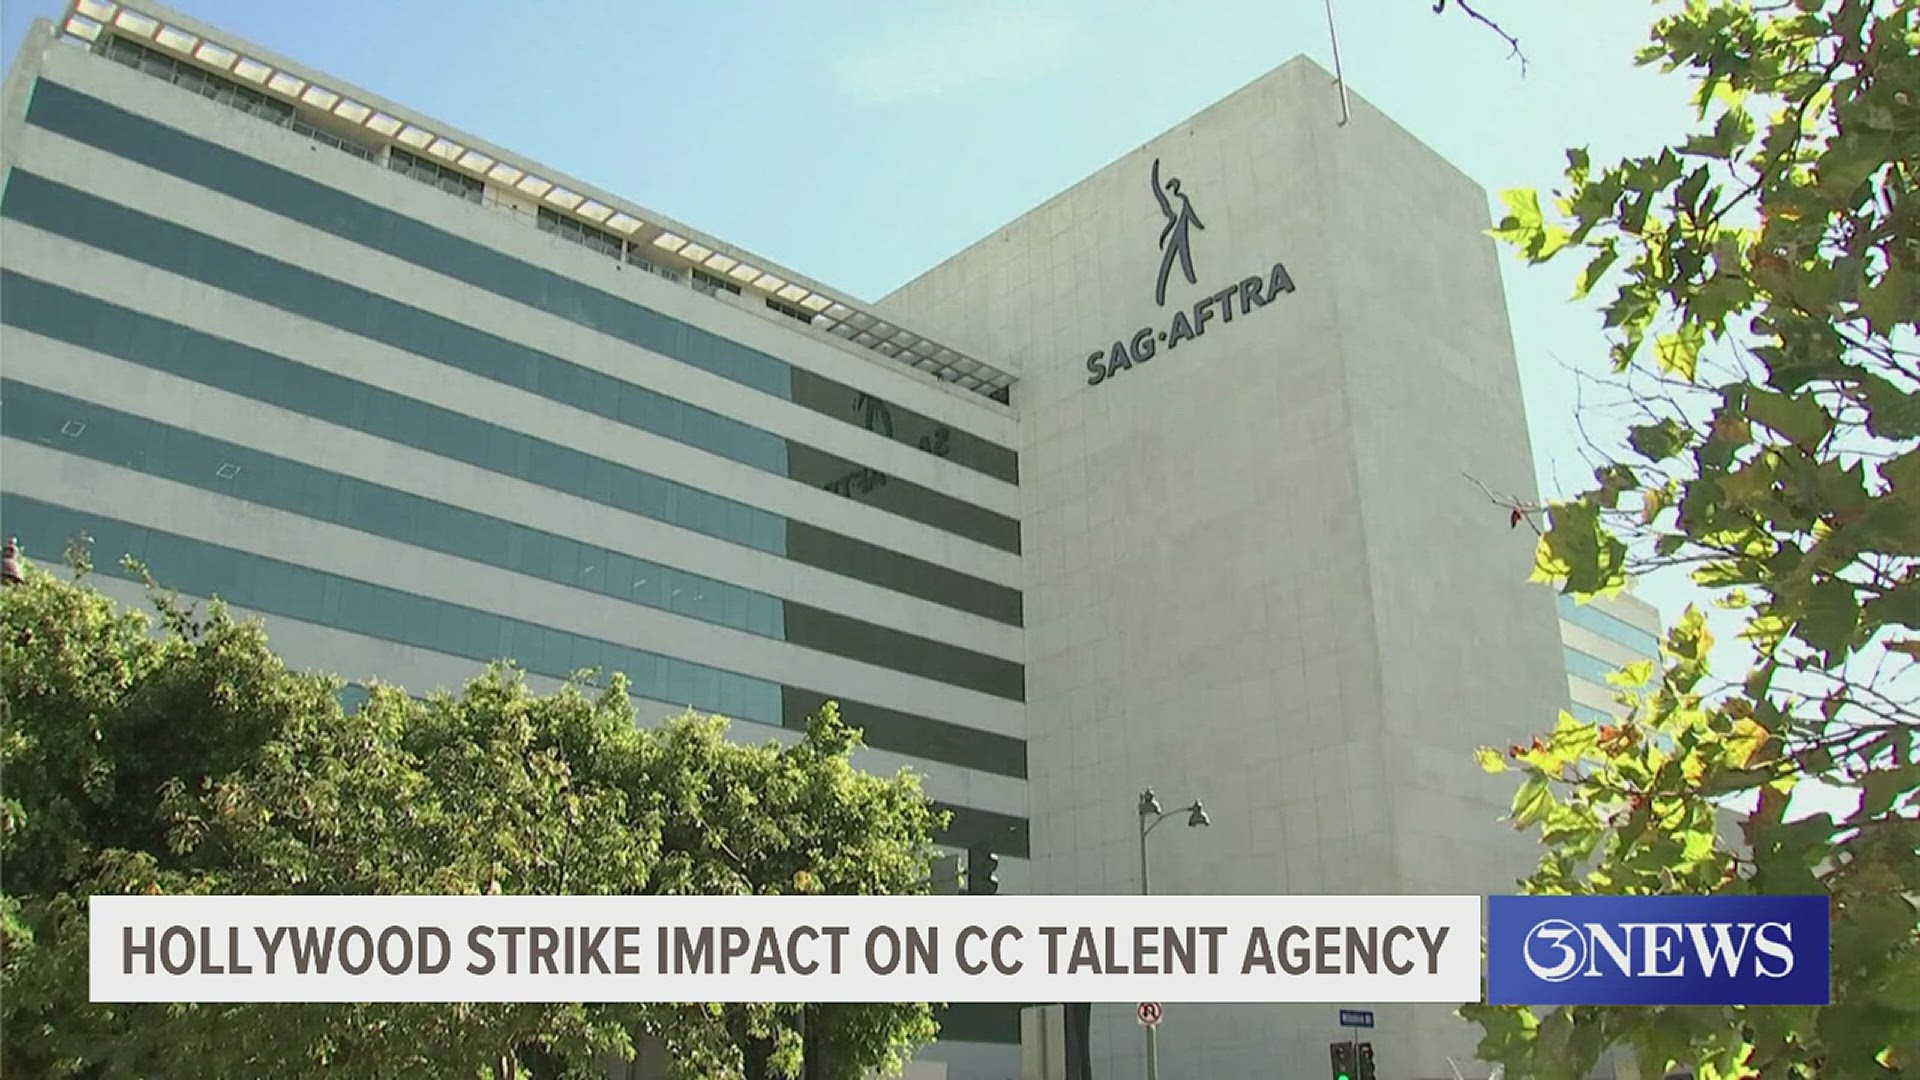 When SAG-AFTRA joined the WGA in their strike, calling for fair pay amongst other demands in July, Garza says saw a more than noticeable shift in bookings.